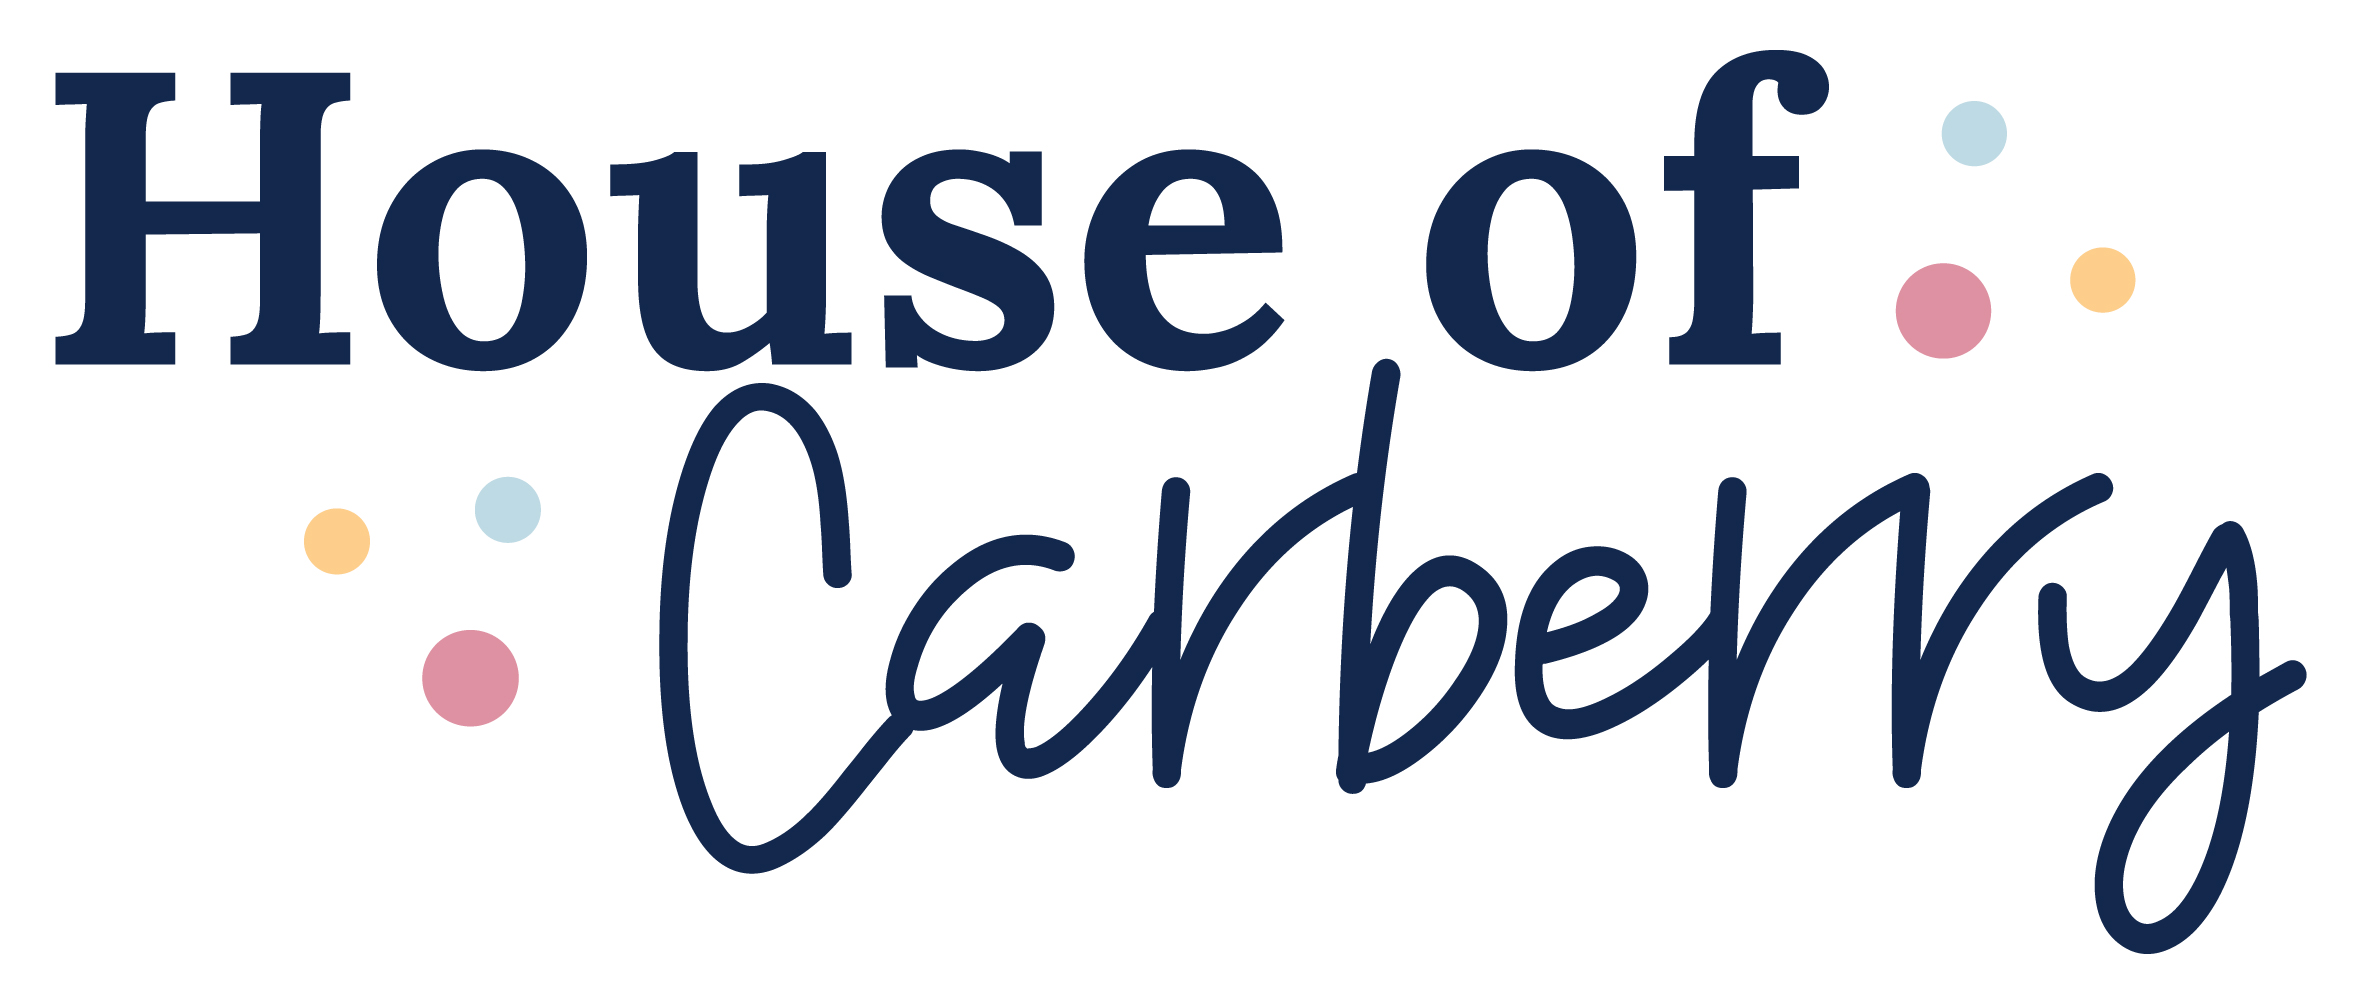 House of Carberry